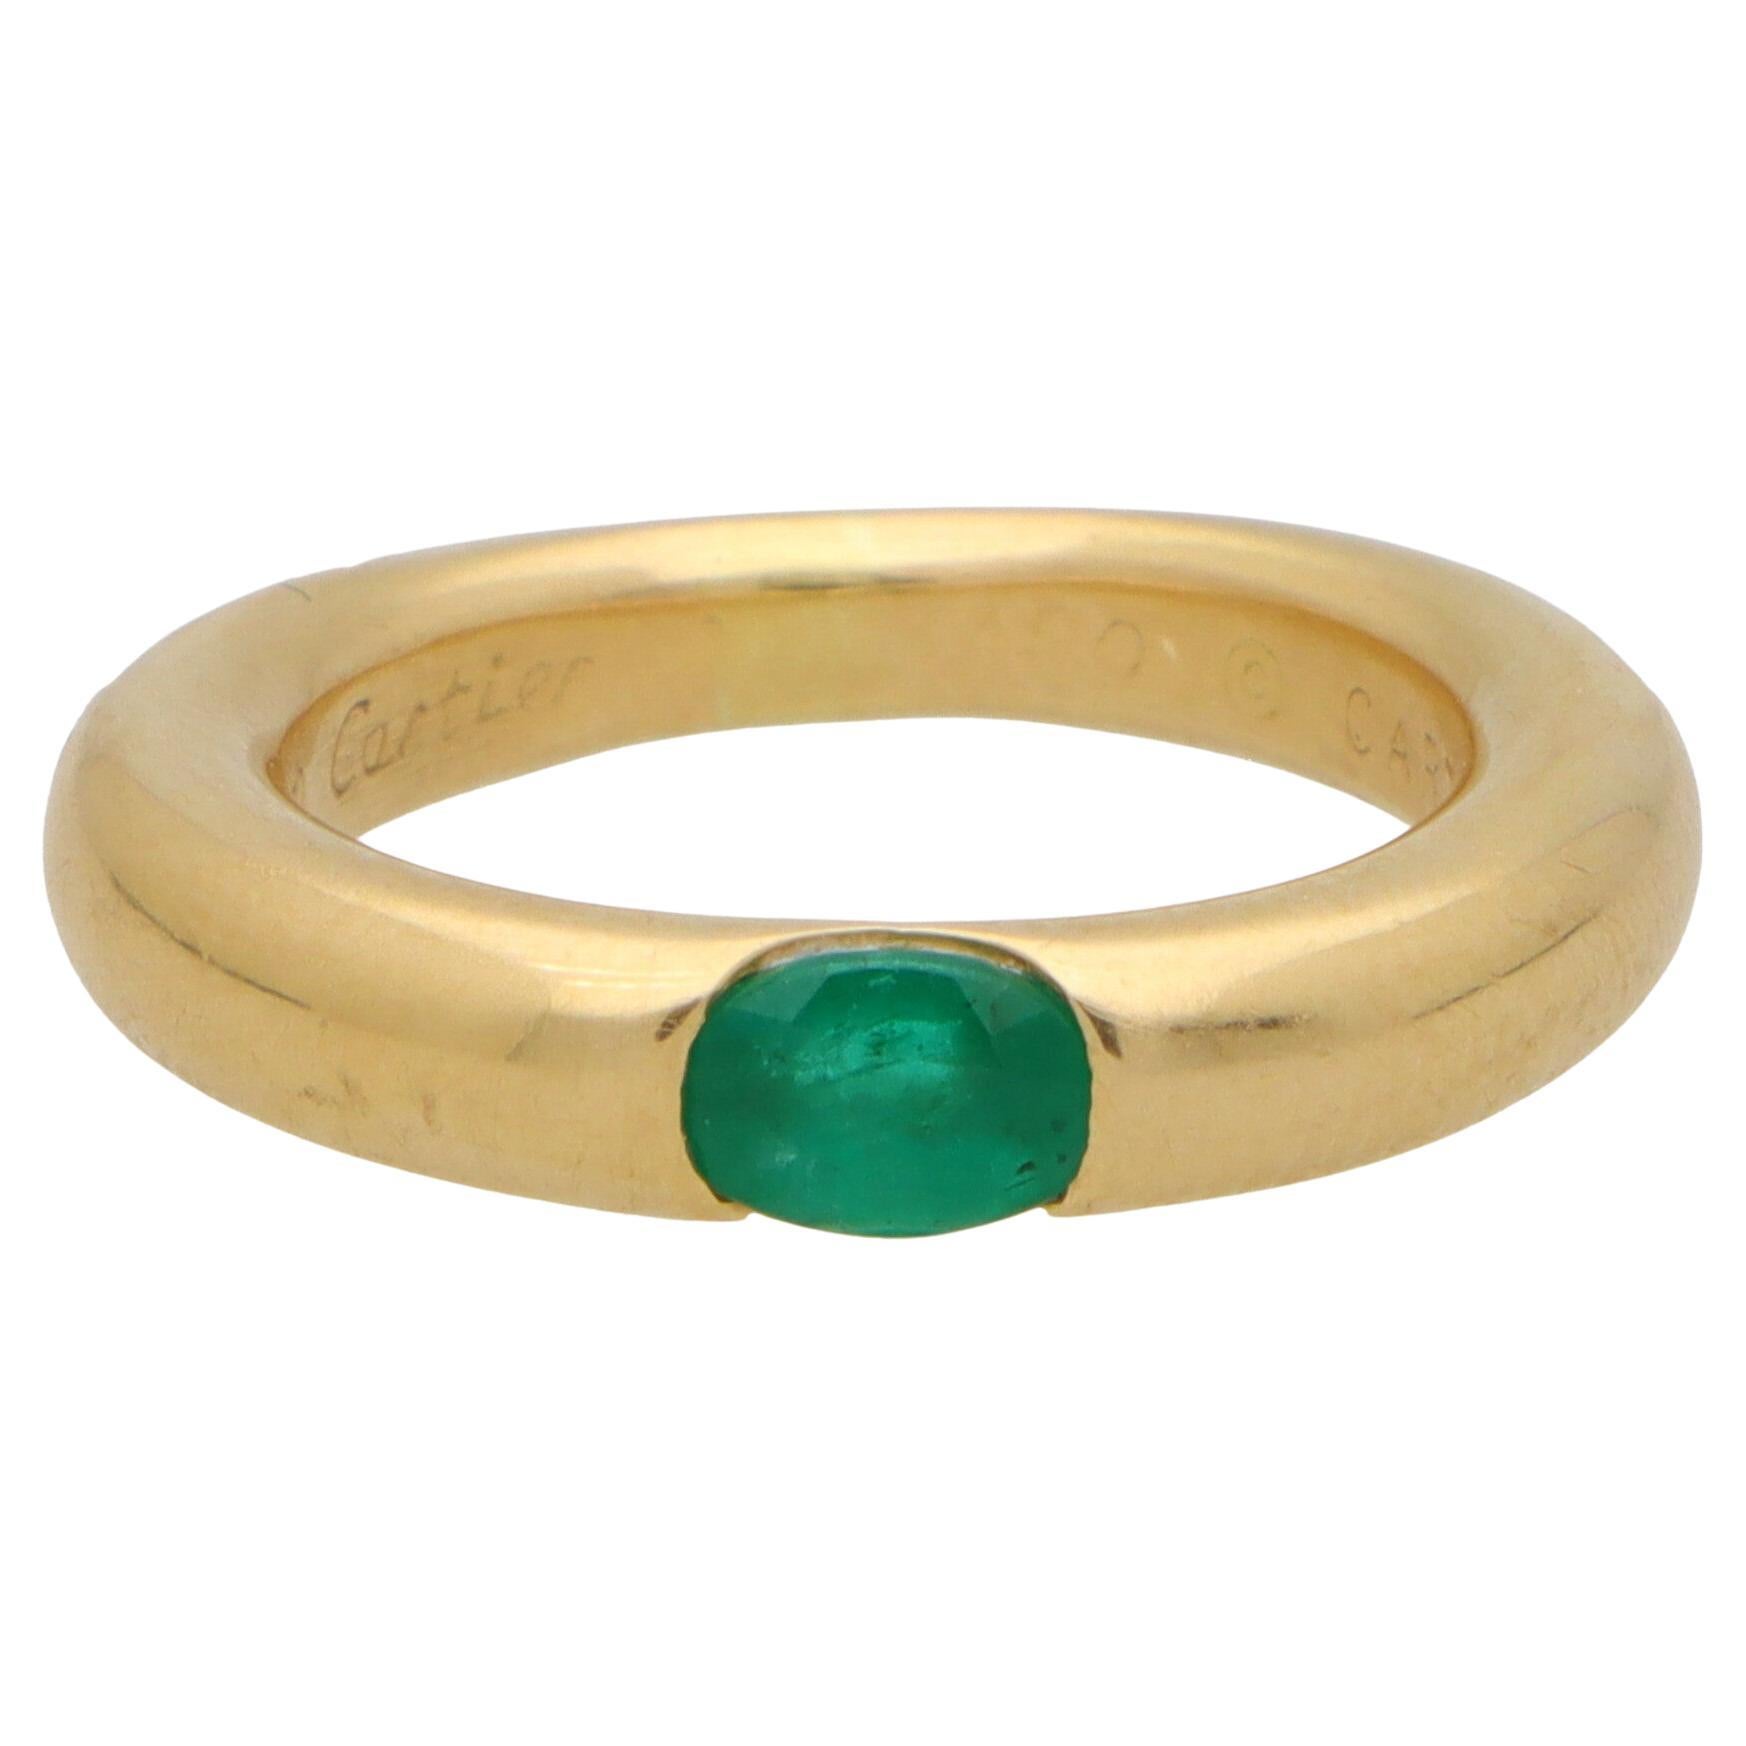 Vintage Cartier Ellipse Emerald Band Ring Set in 18k Yellow Gold